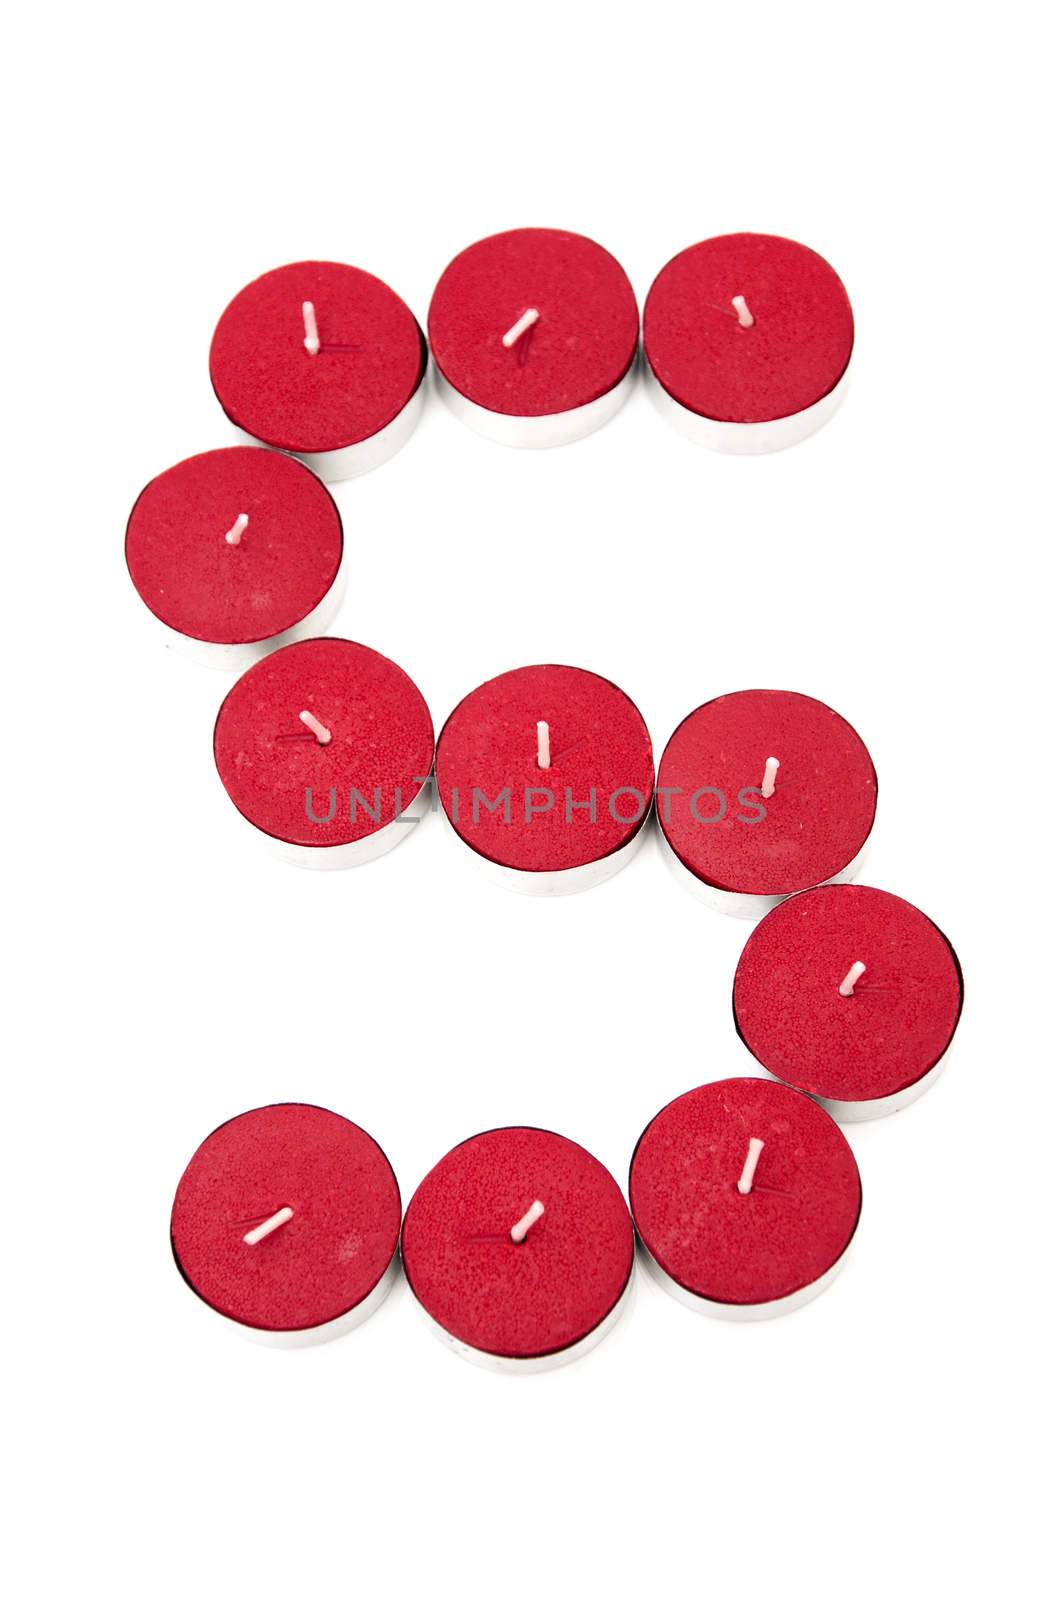 Letter S formed by candles on a white background